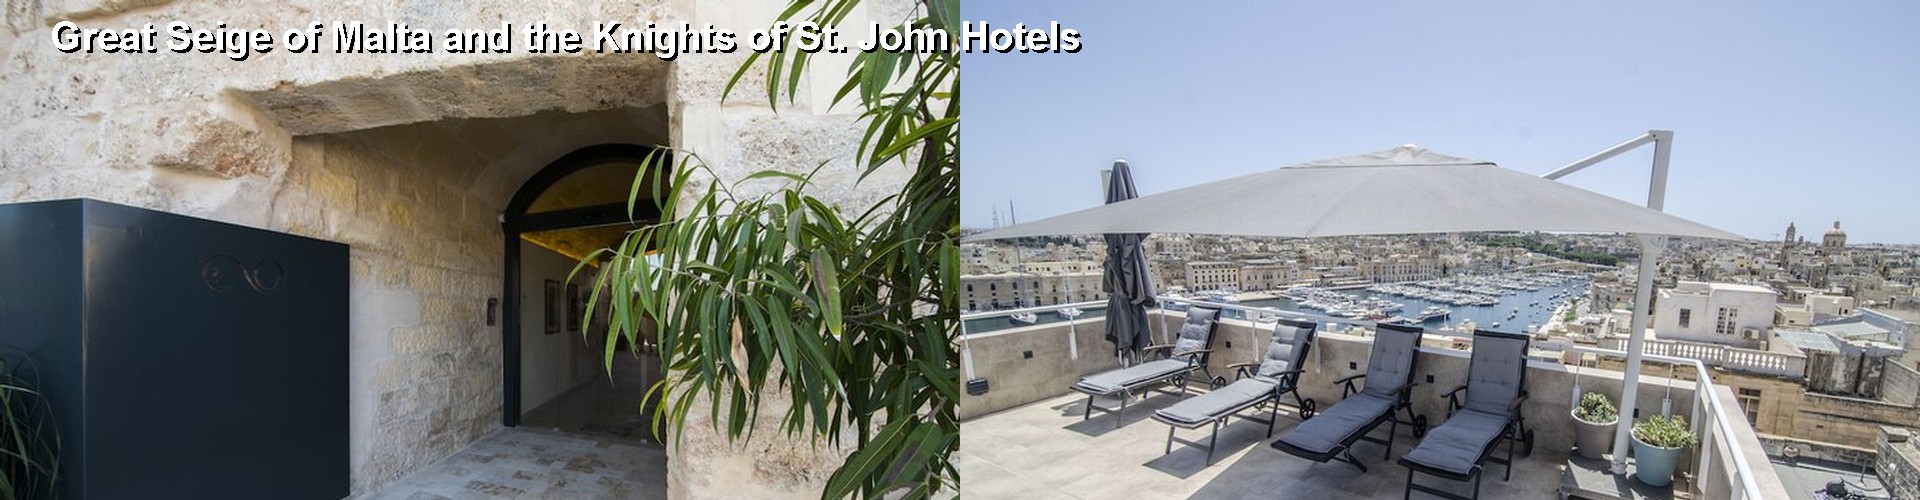 5 Best Hotels near Great Seige of Malta and the Knights of St. John